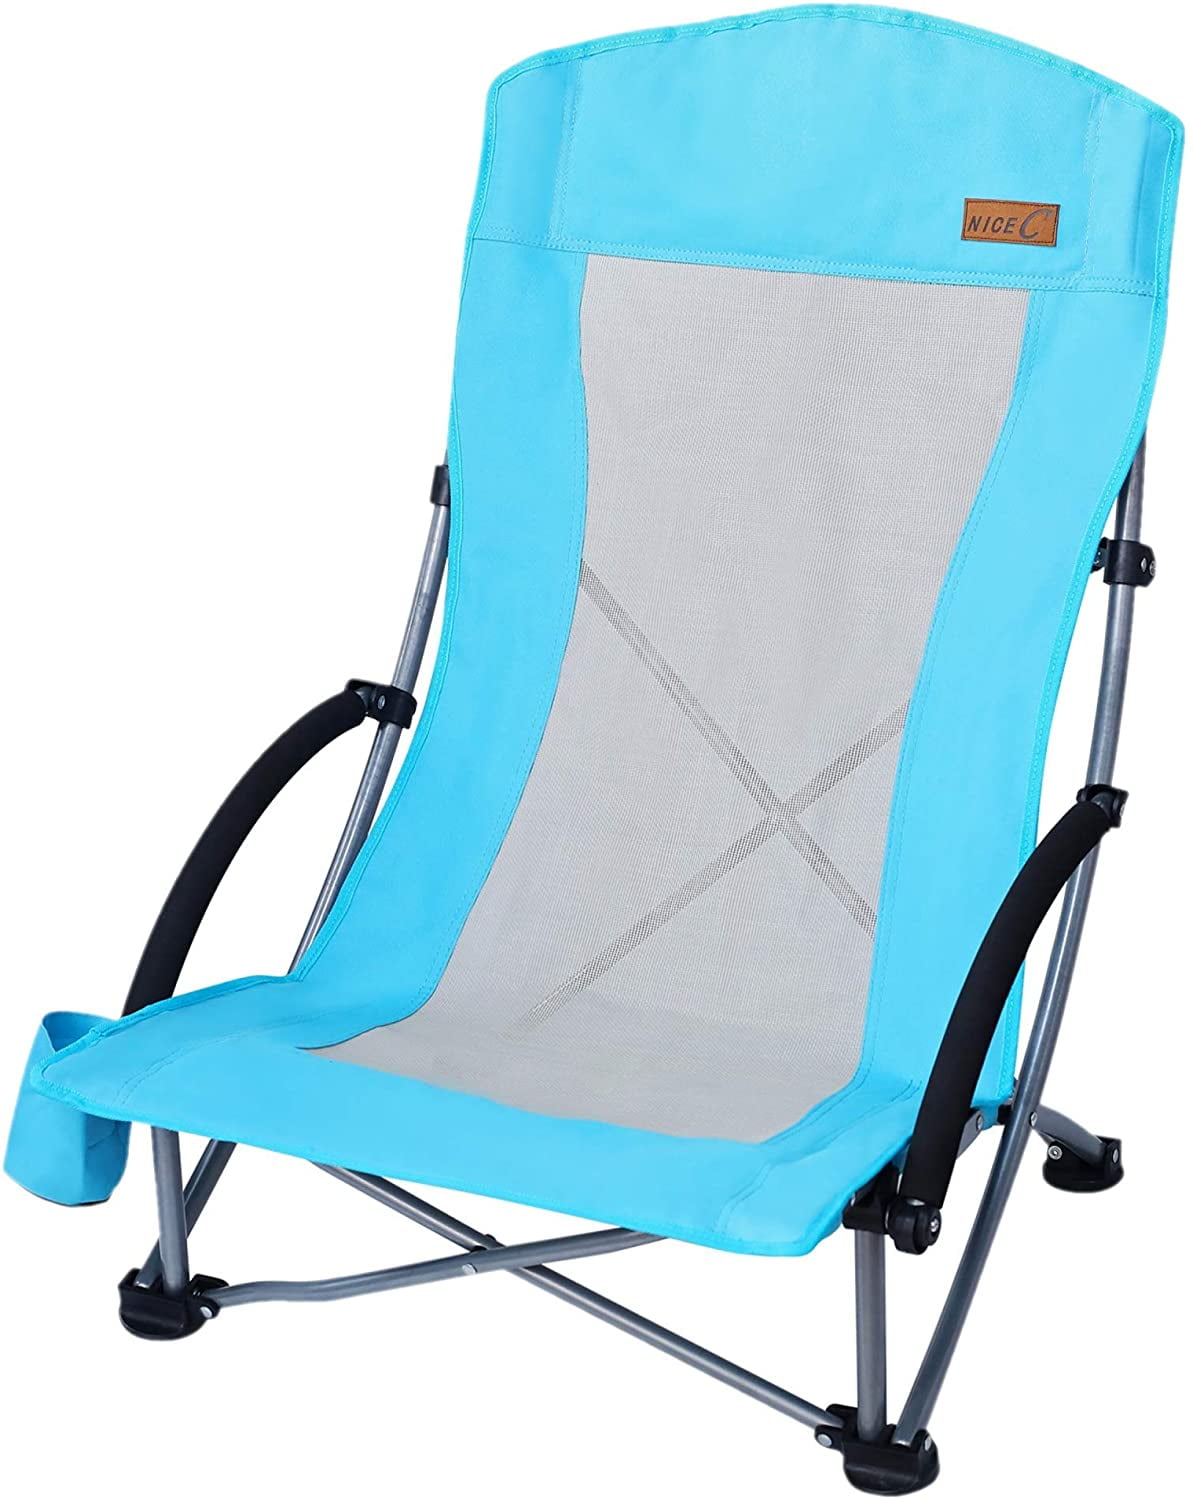 Details about   Outdoor Picnic Camping Steel Frame Mesh Chair with Beverage Holder Jade Sky 